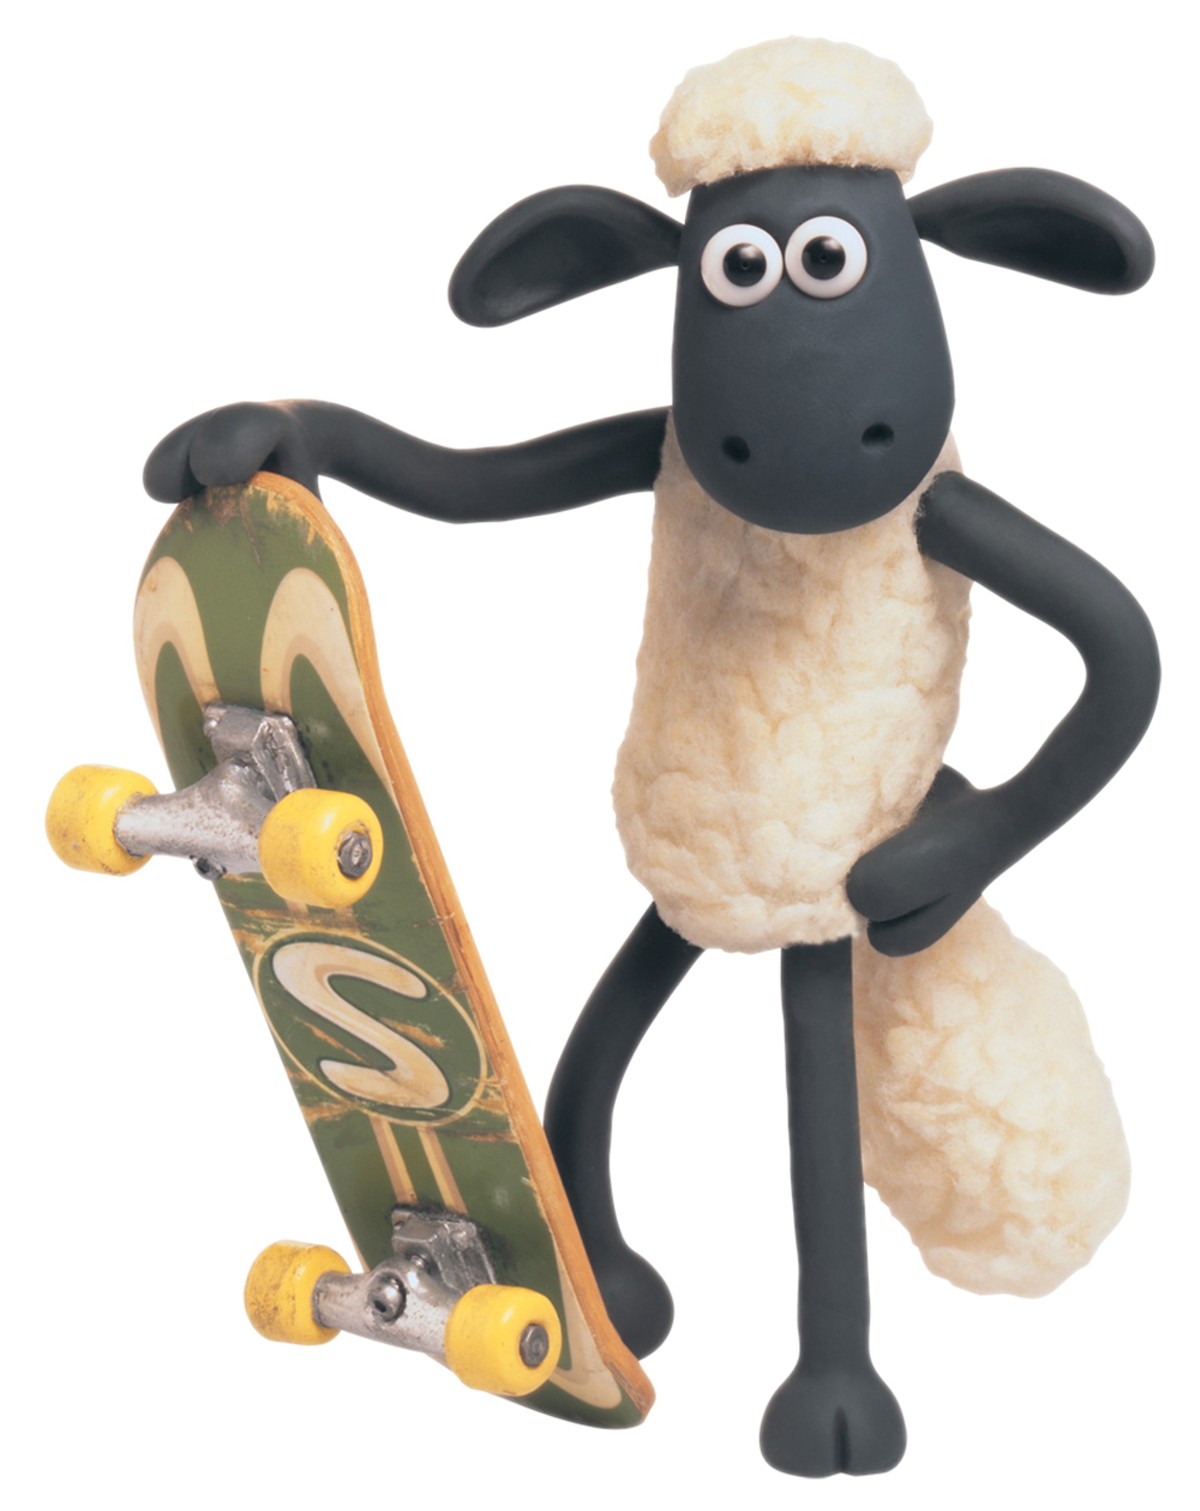 Aardman’s Shaun the Sheep TV series is more cute than clever